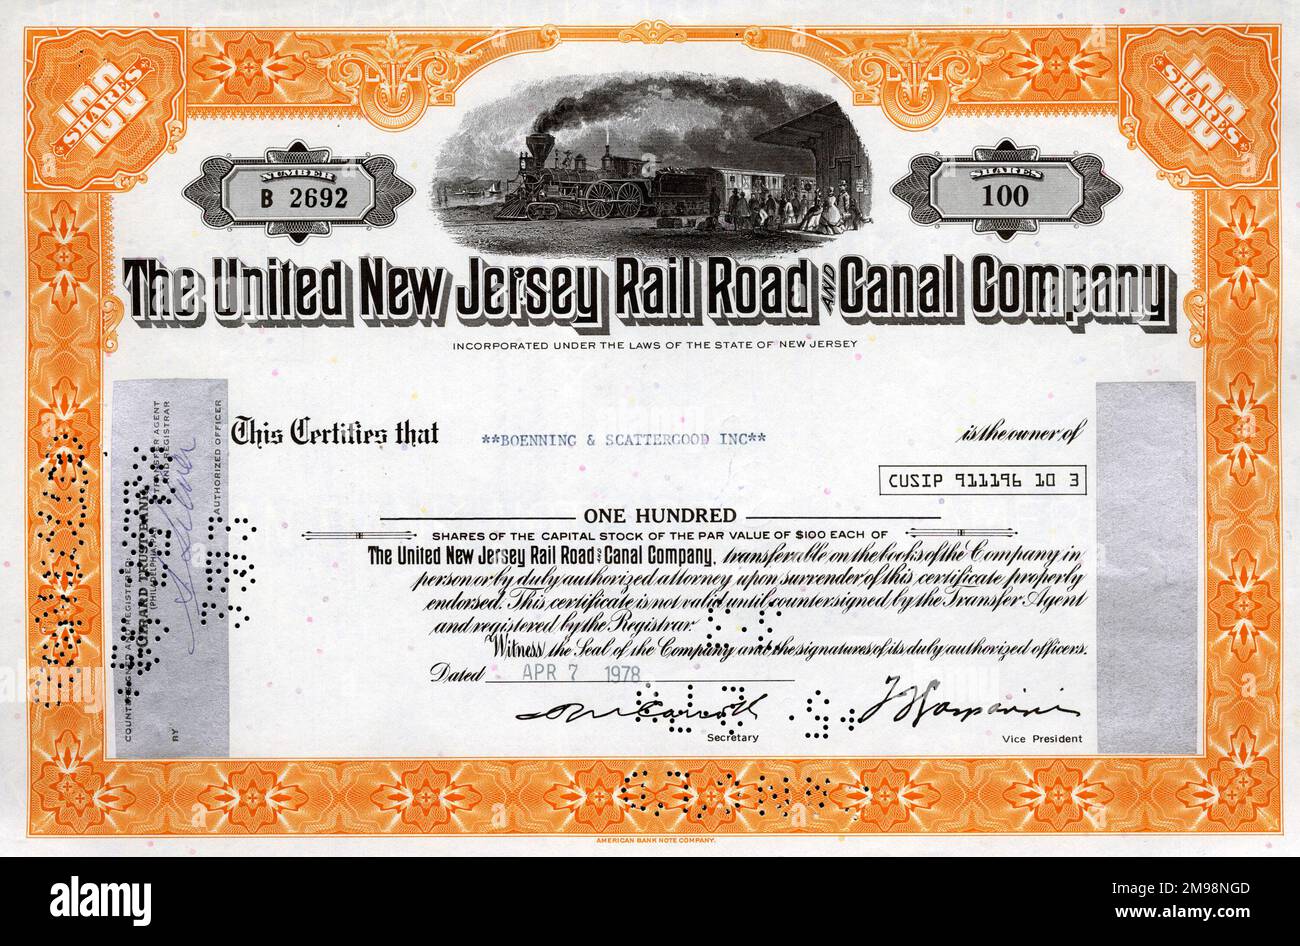 Stock Share Certificate - The United New Jersey Rail Road and Canal Company, 100 shares. Stock Photo